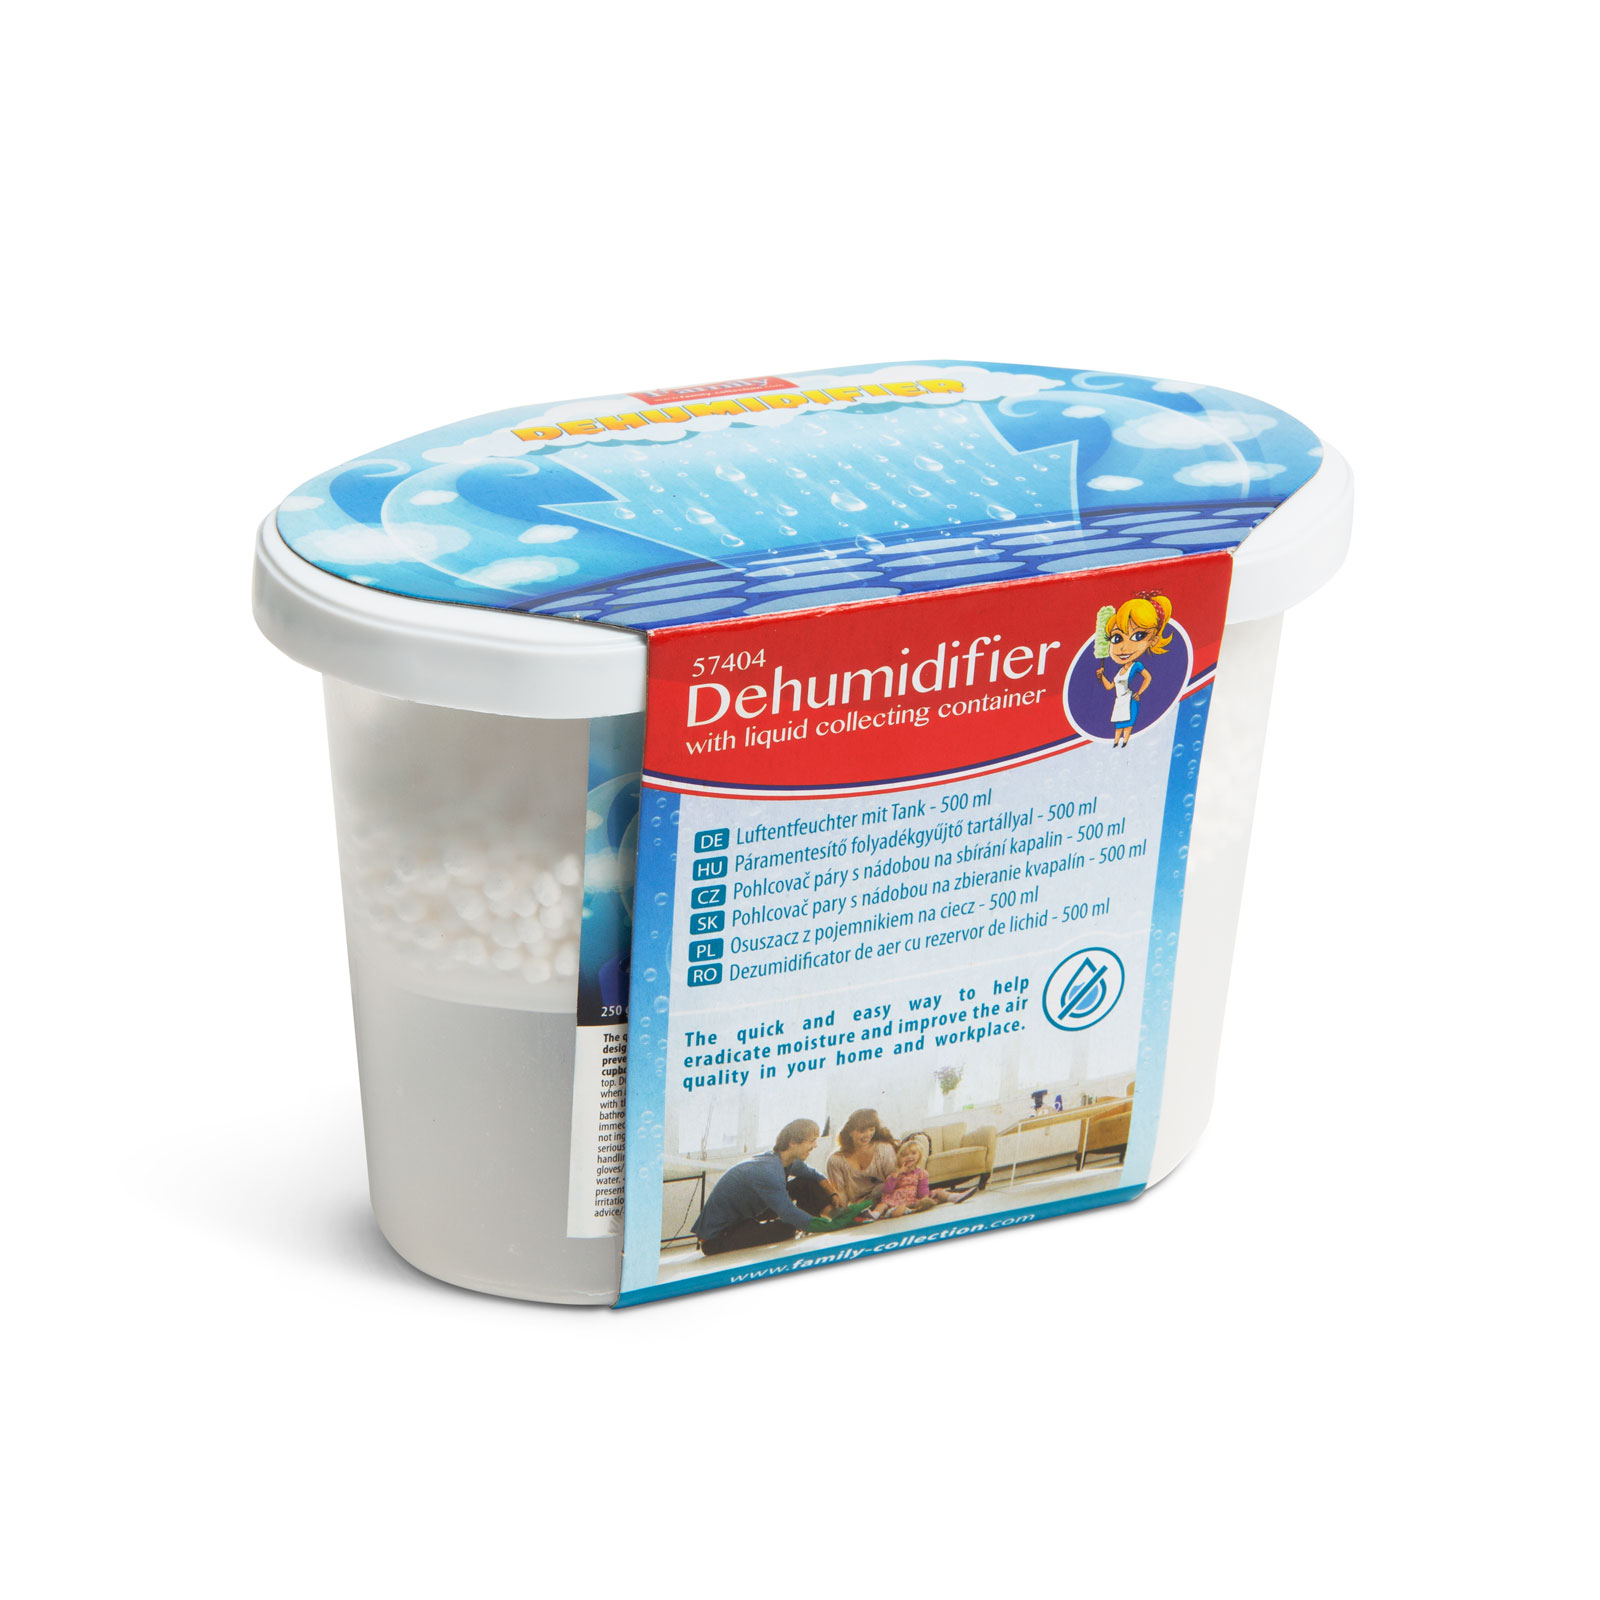 Dehumidifier with liquid collecting container - 500 ml thumb